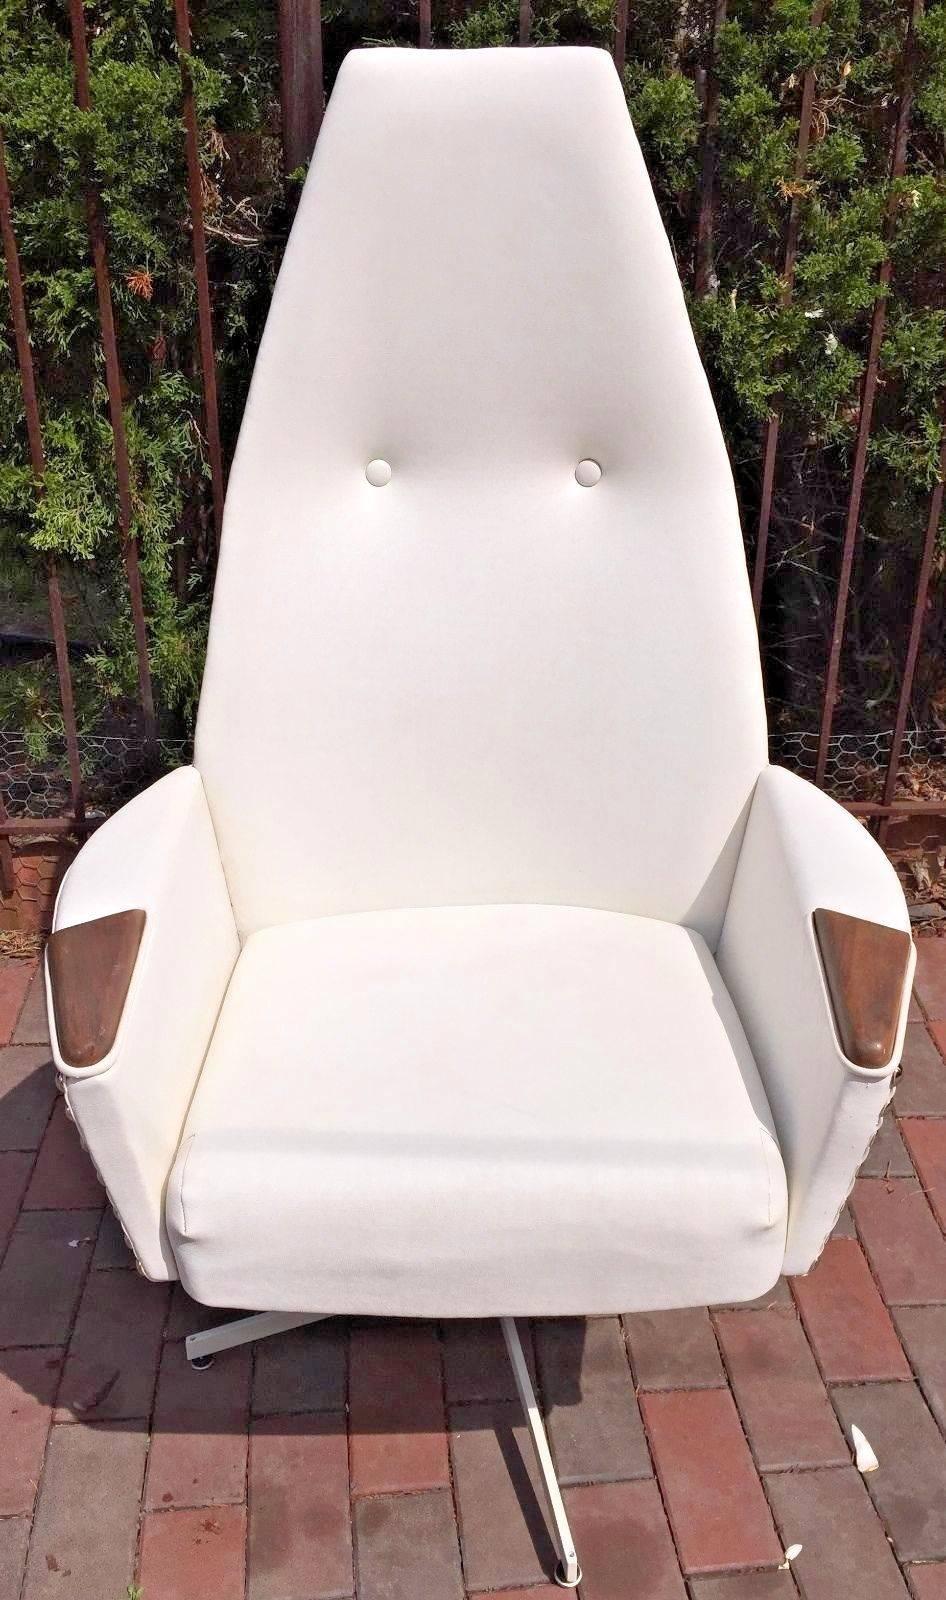 A stunning lounge chair designed by Adrian Pearsal lmodel 2174-C for Craft Associates. The chair is in excellent condition, upholstered in an ivory vinyl with exaggerated nailhead trim, this chair is a stunner.

The chair is on a swivel base and